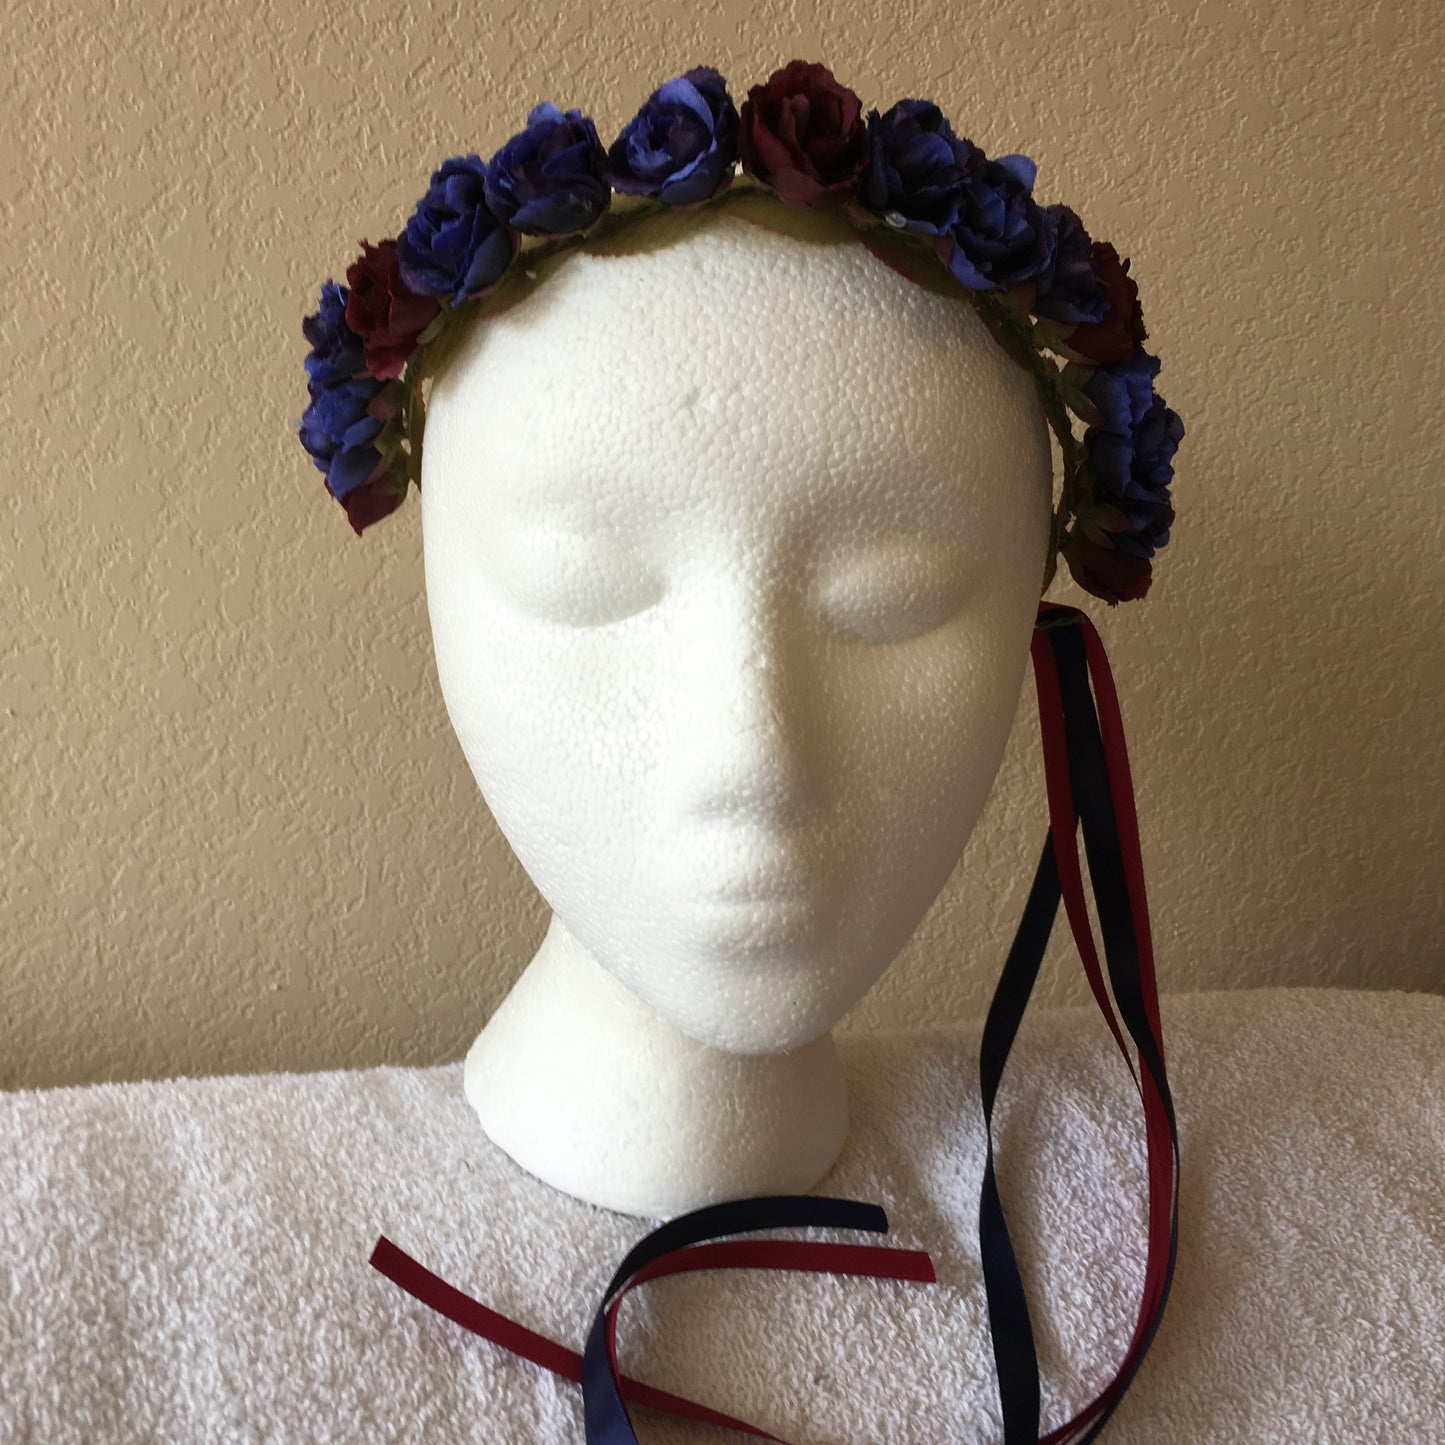 Extra Small Wreath - Royal blue roses w/ accent burgundy accent roses